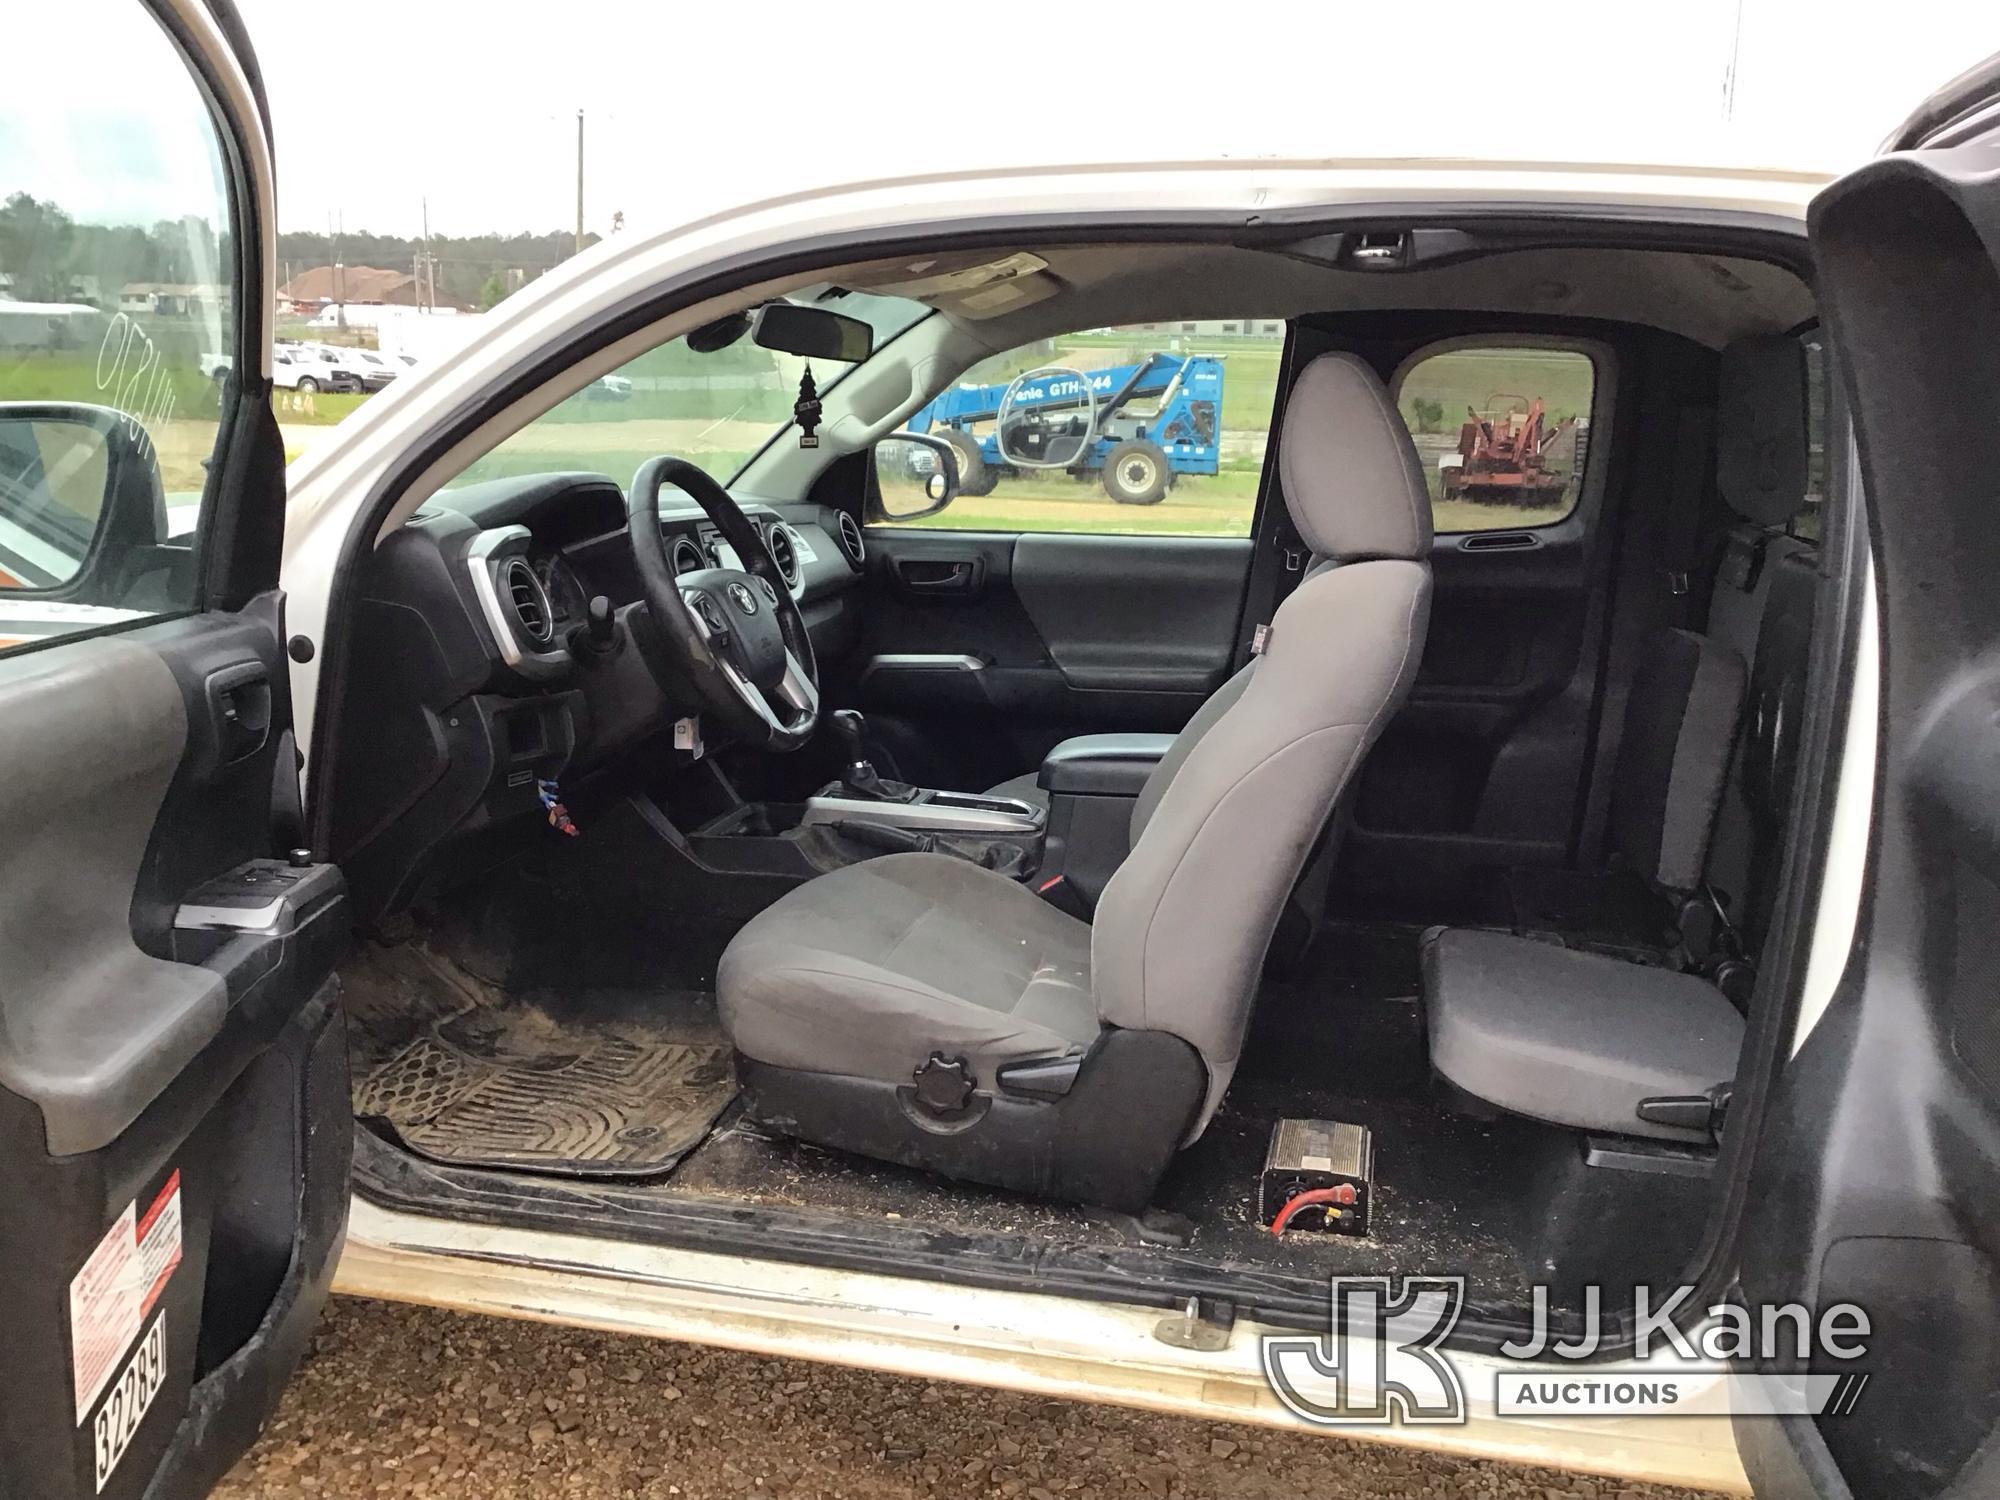 (Byram, MS) 2016 Toyota Tacoma 4x4 Extended-Cab Pickup Truck Runs & Moves) (Windshield cracked, Chec